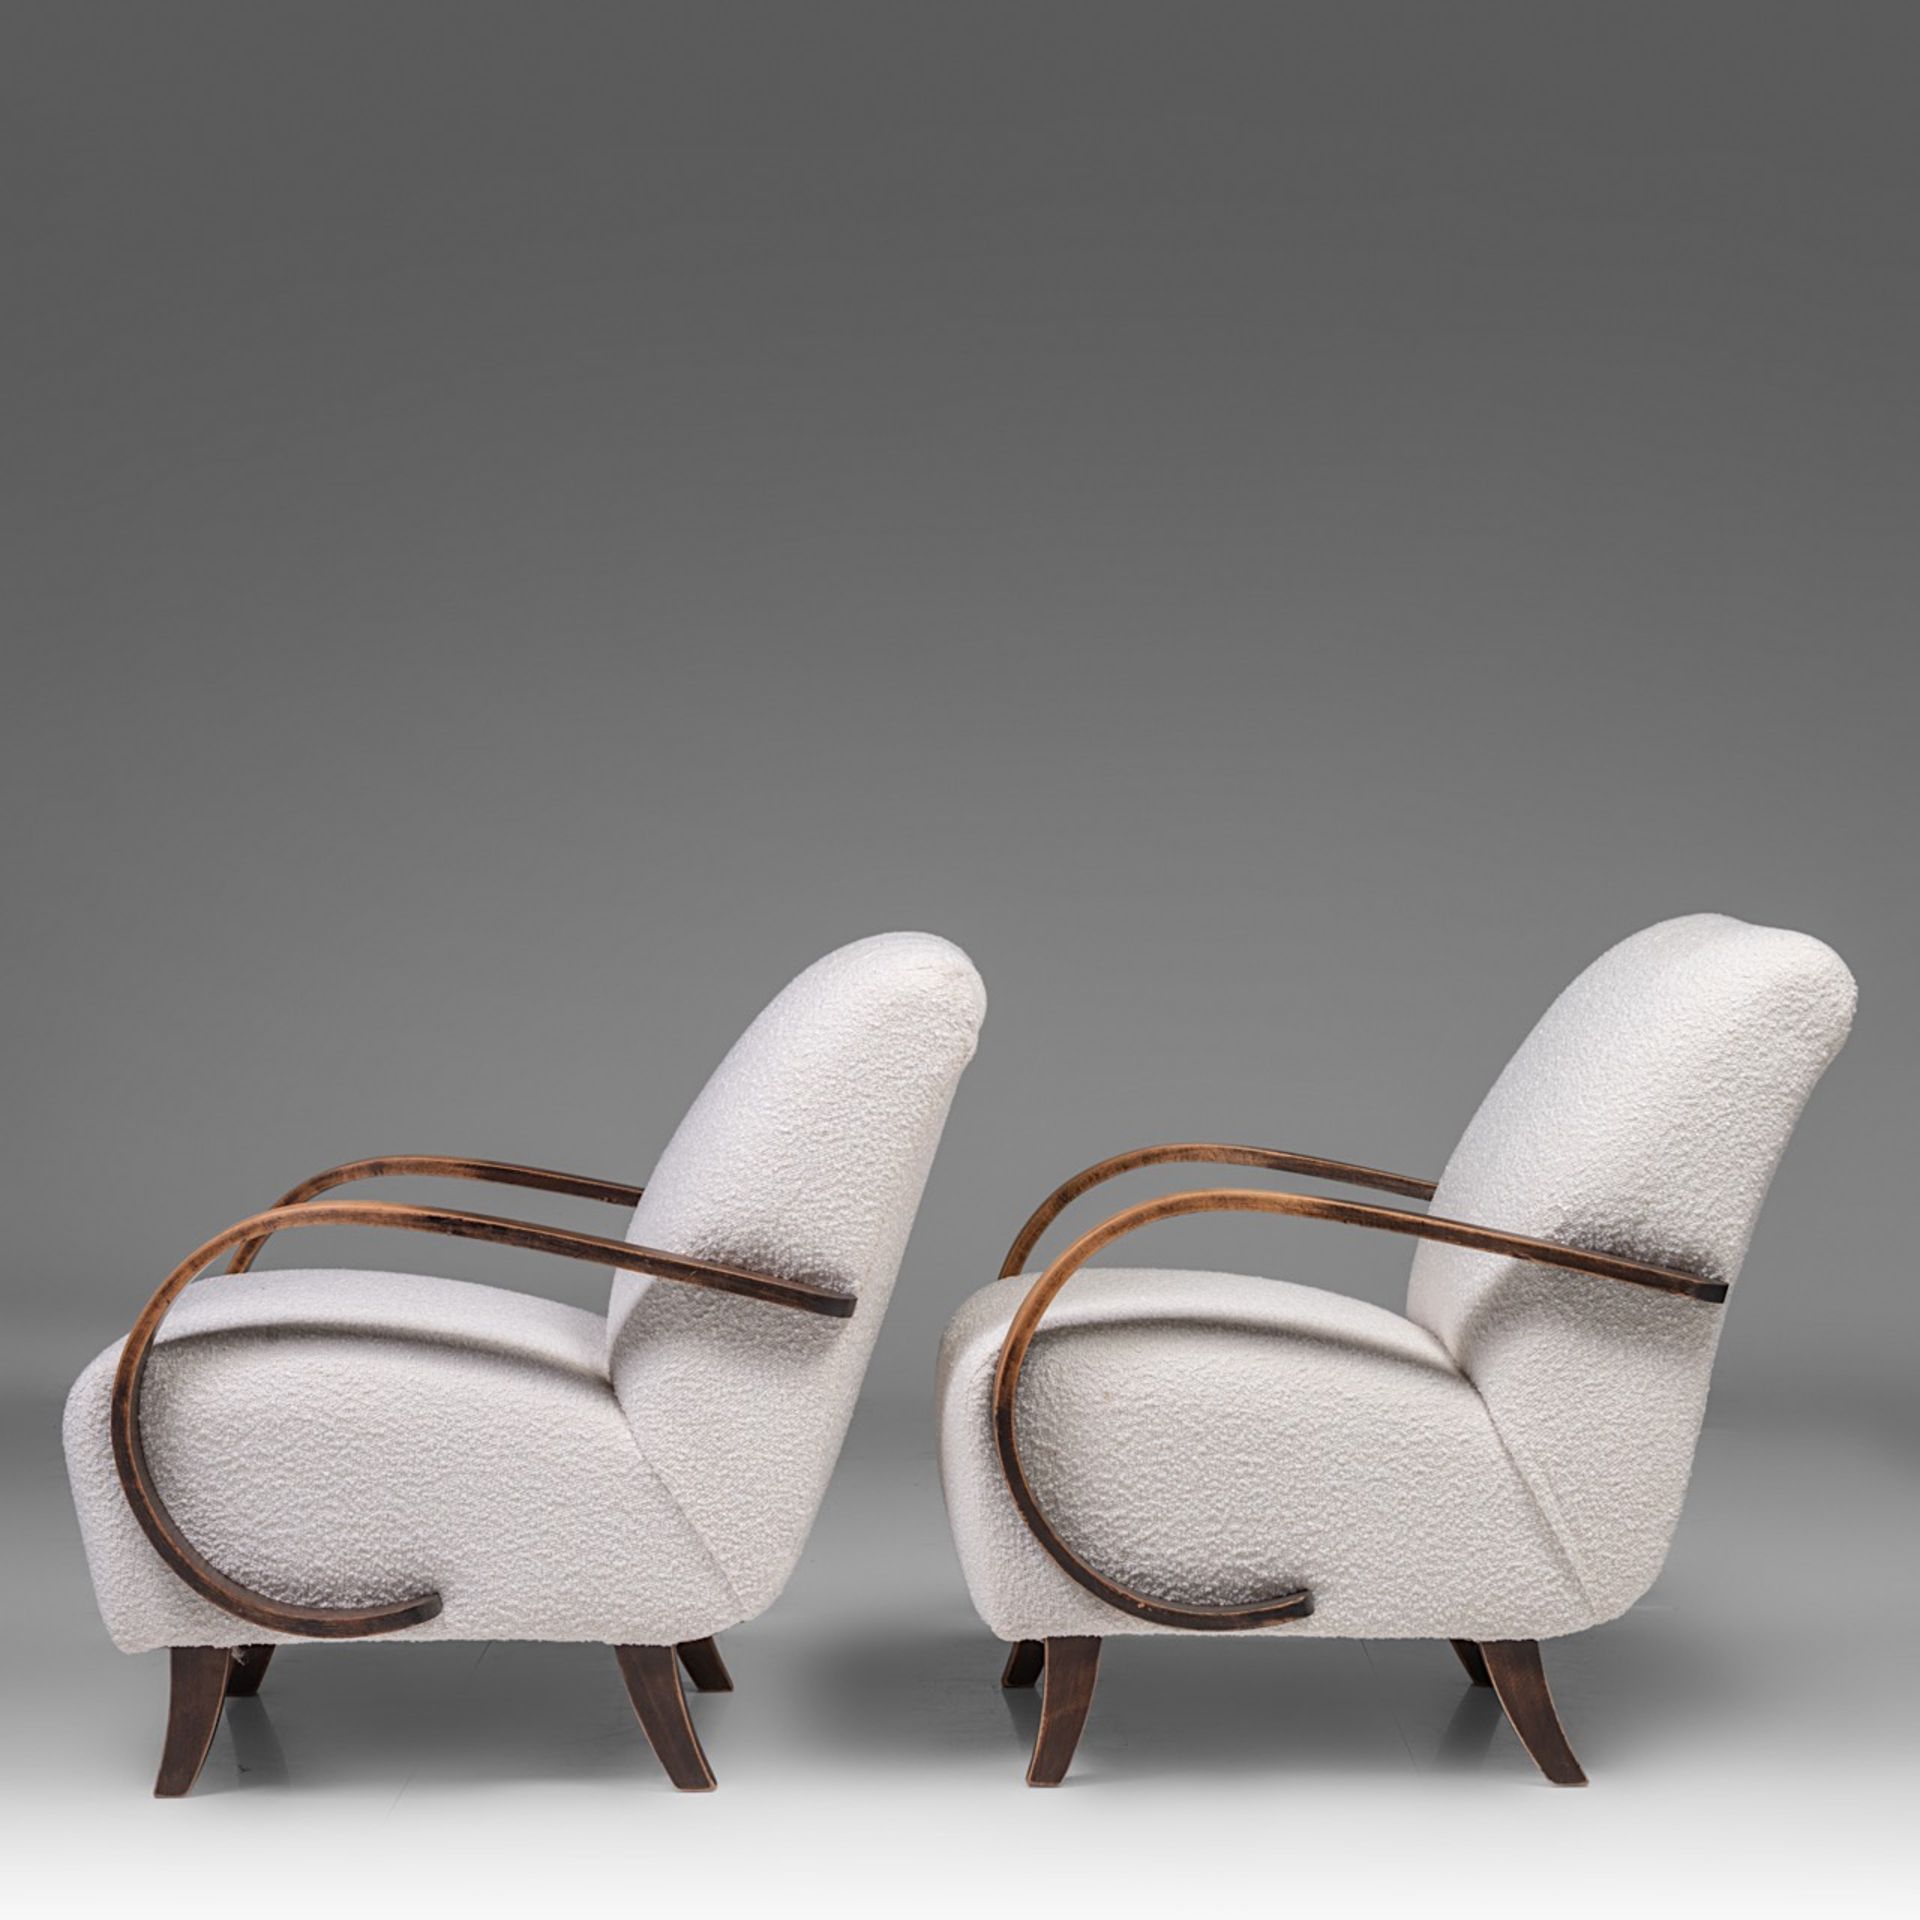 A pair of Mid-century Armchairs by Jindrich Halabala, 1950s 83 x 68 x 87 cm. (32.6 x 26.7 x 34 1/4 i - Image 4 of 13